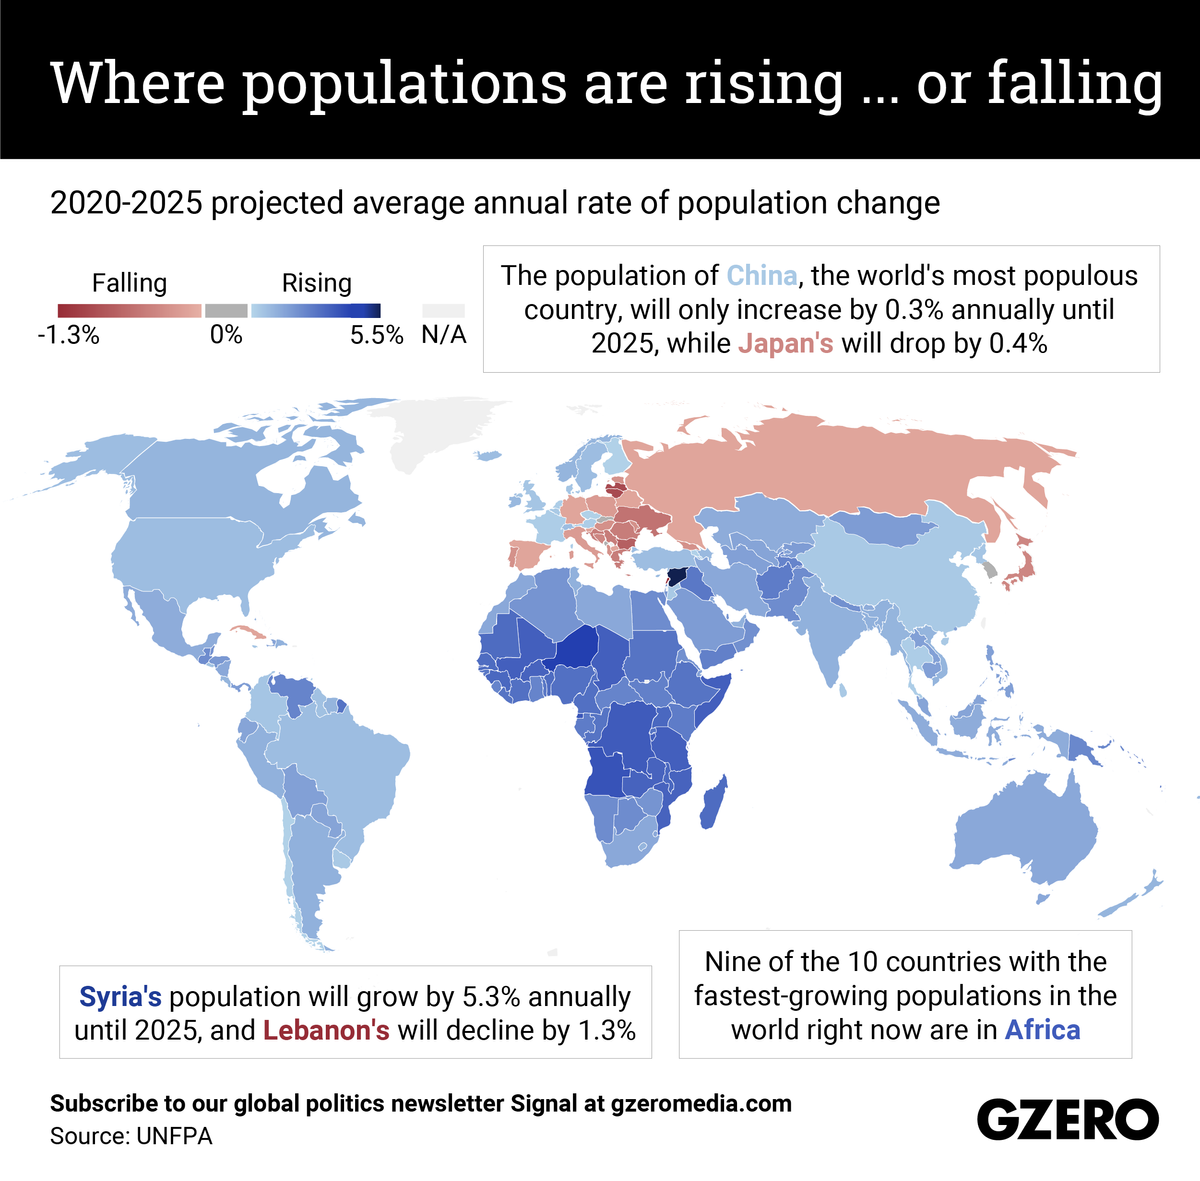 The Graphic Truth: Where populations are rising ... or falling